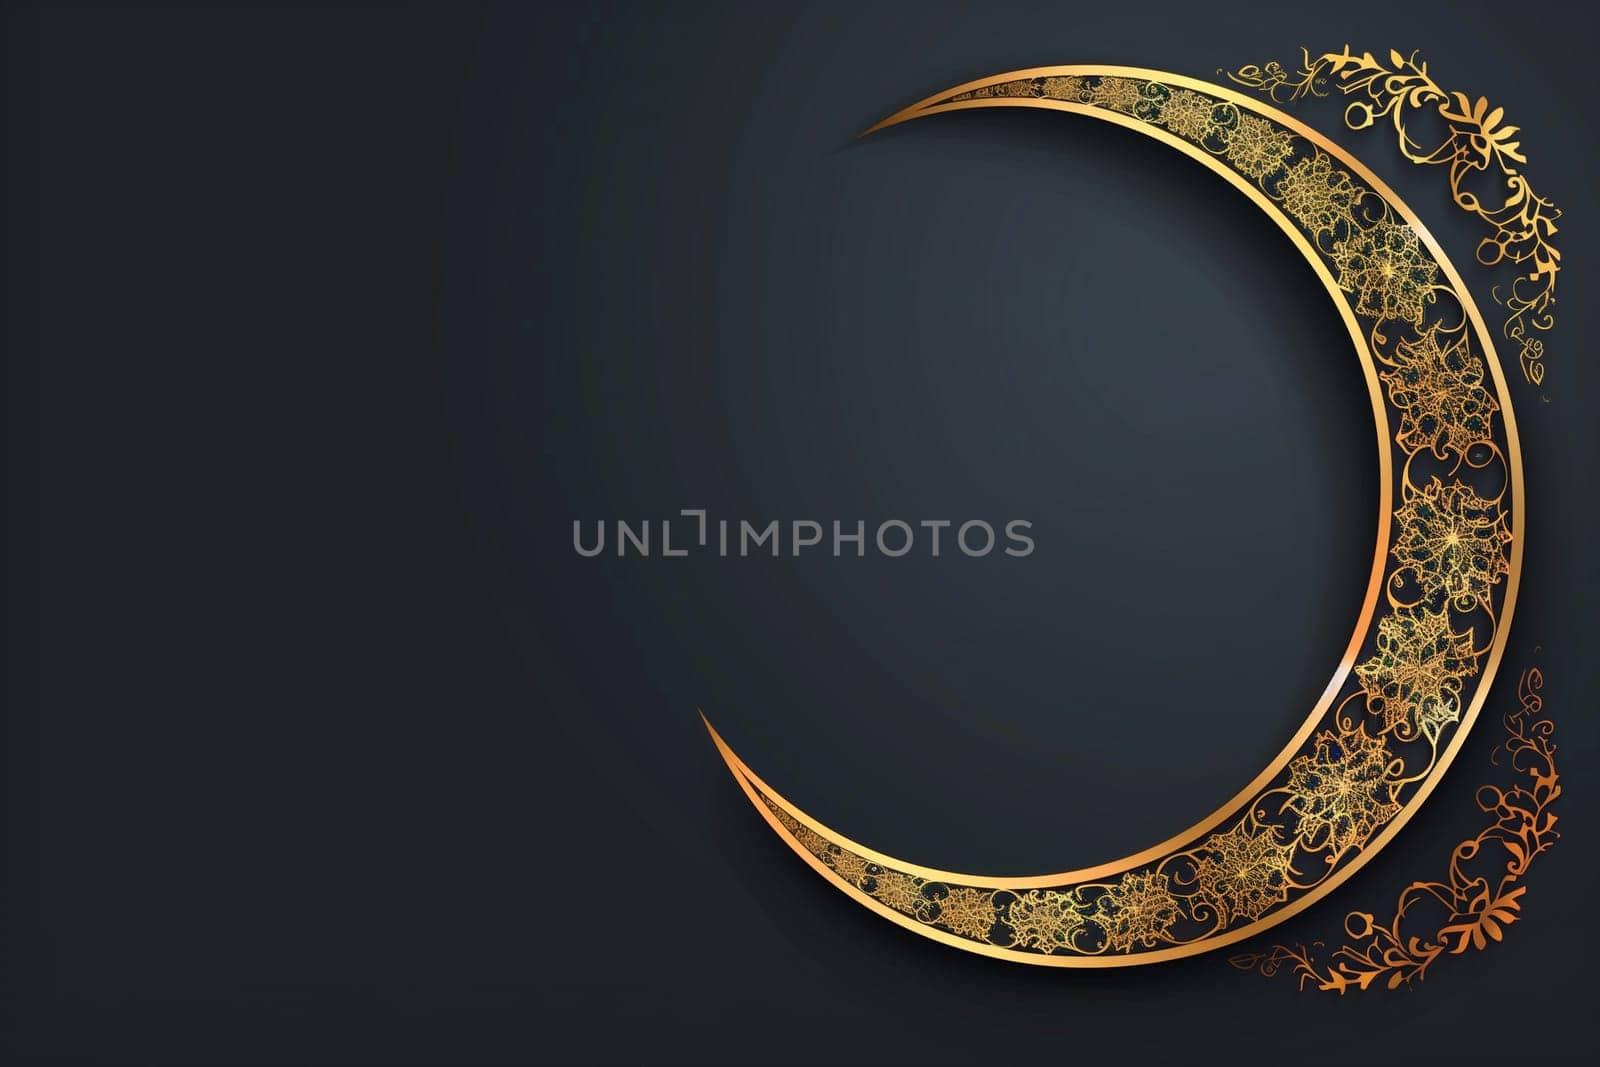 A golden crescent shape stands out on a solid black background, showcasing a symbol often associated with the Islamic faith.